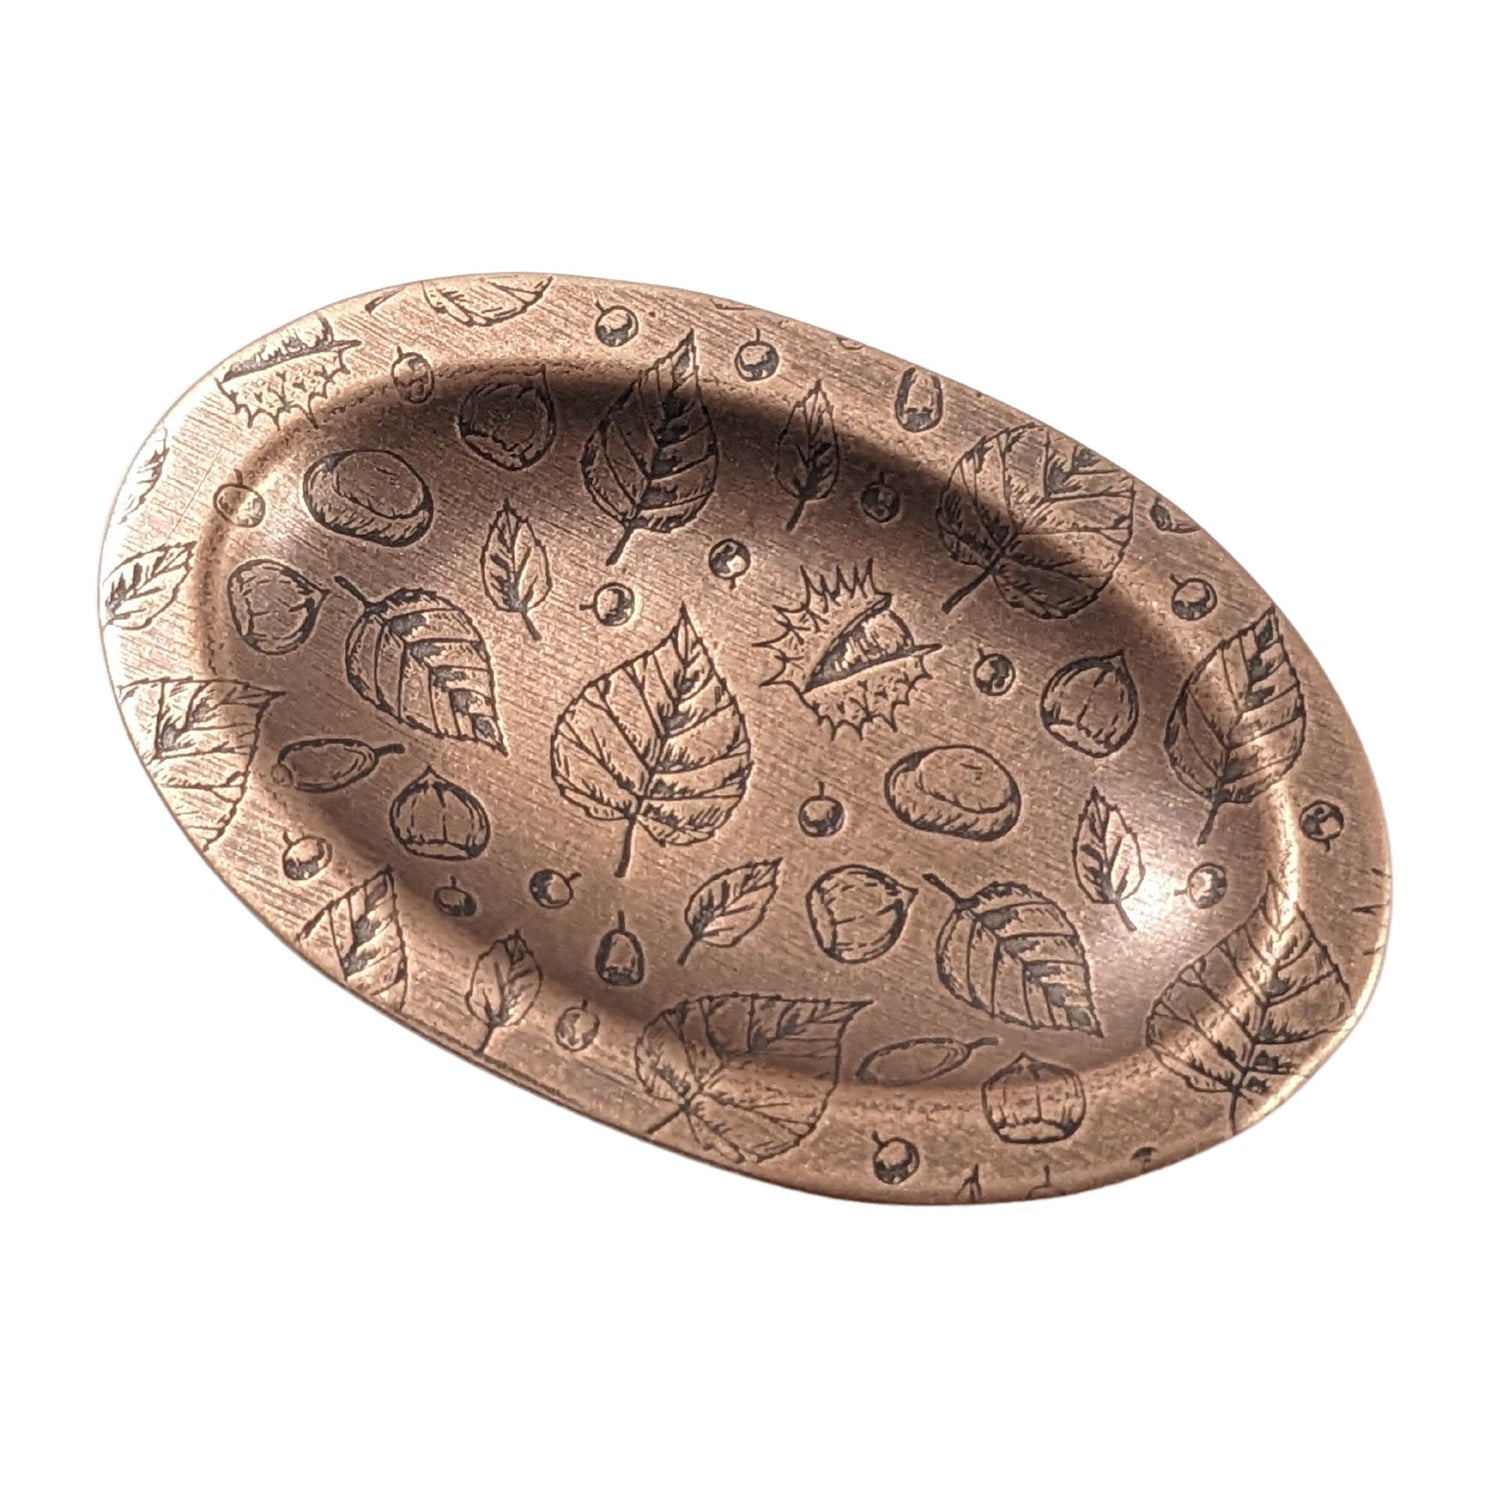 Oval copper ring dish with a raised edge. Pattern on dish is leaves, acorns, and other fall tree nuts.